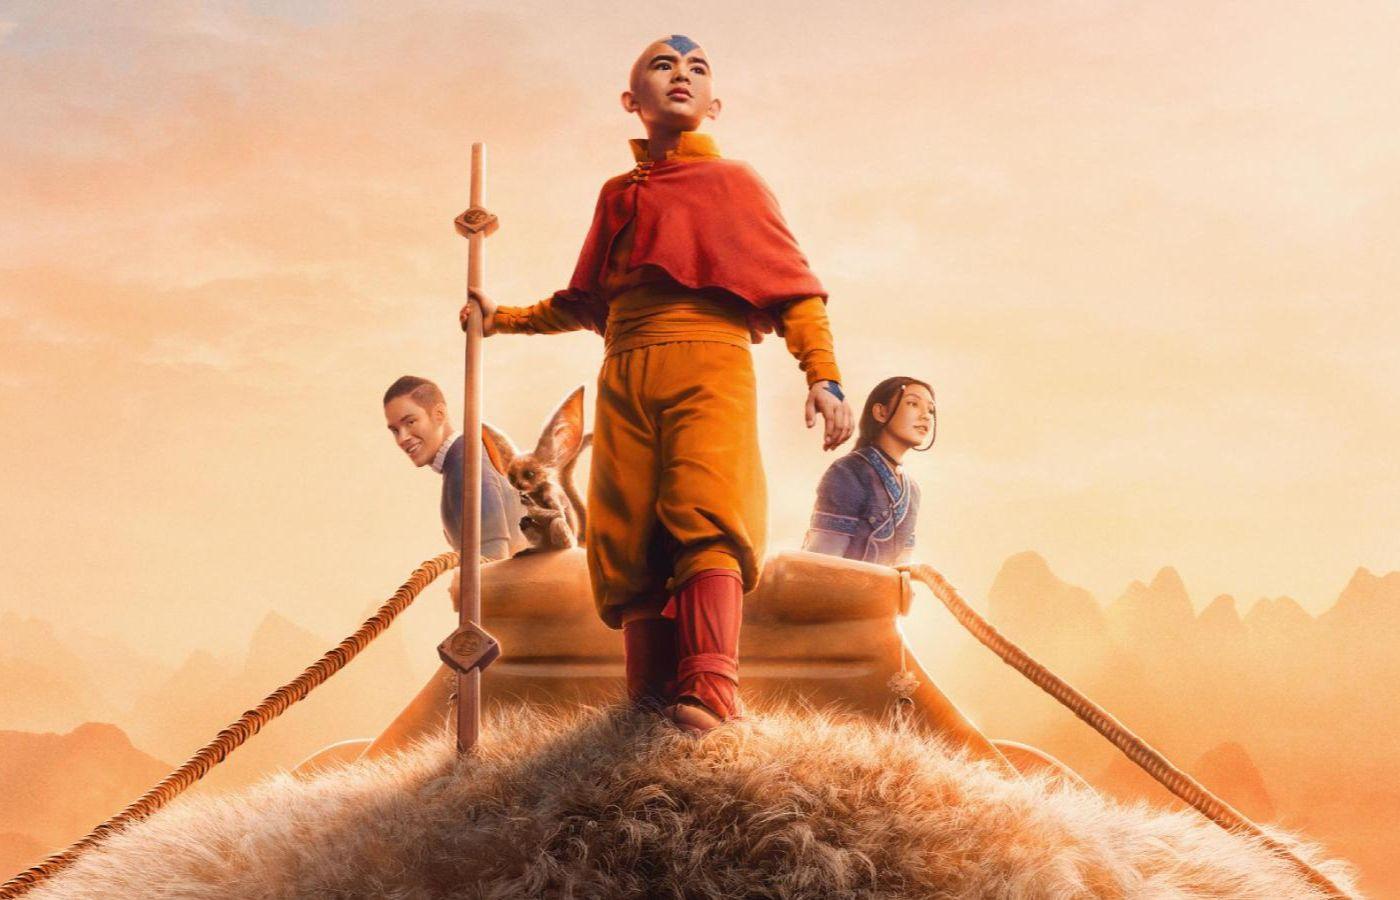 The cast of Avatar: The Last Airbender